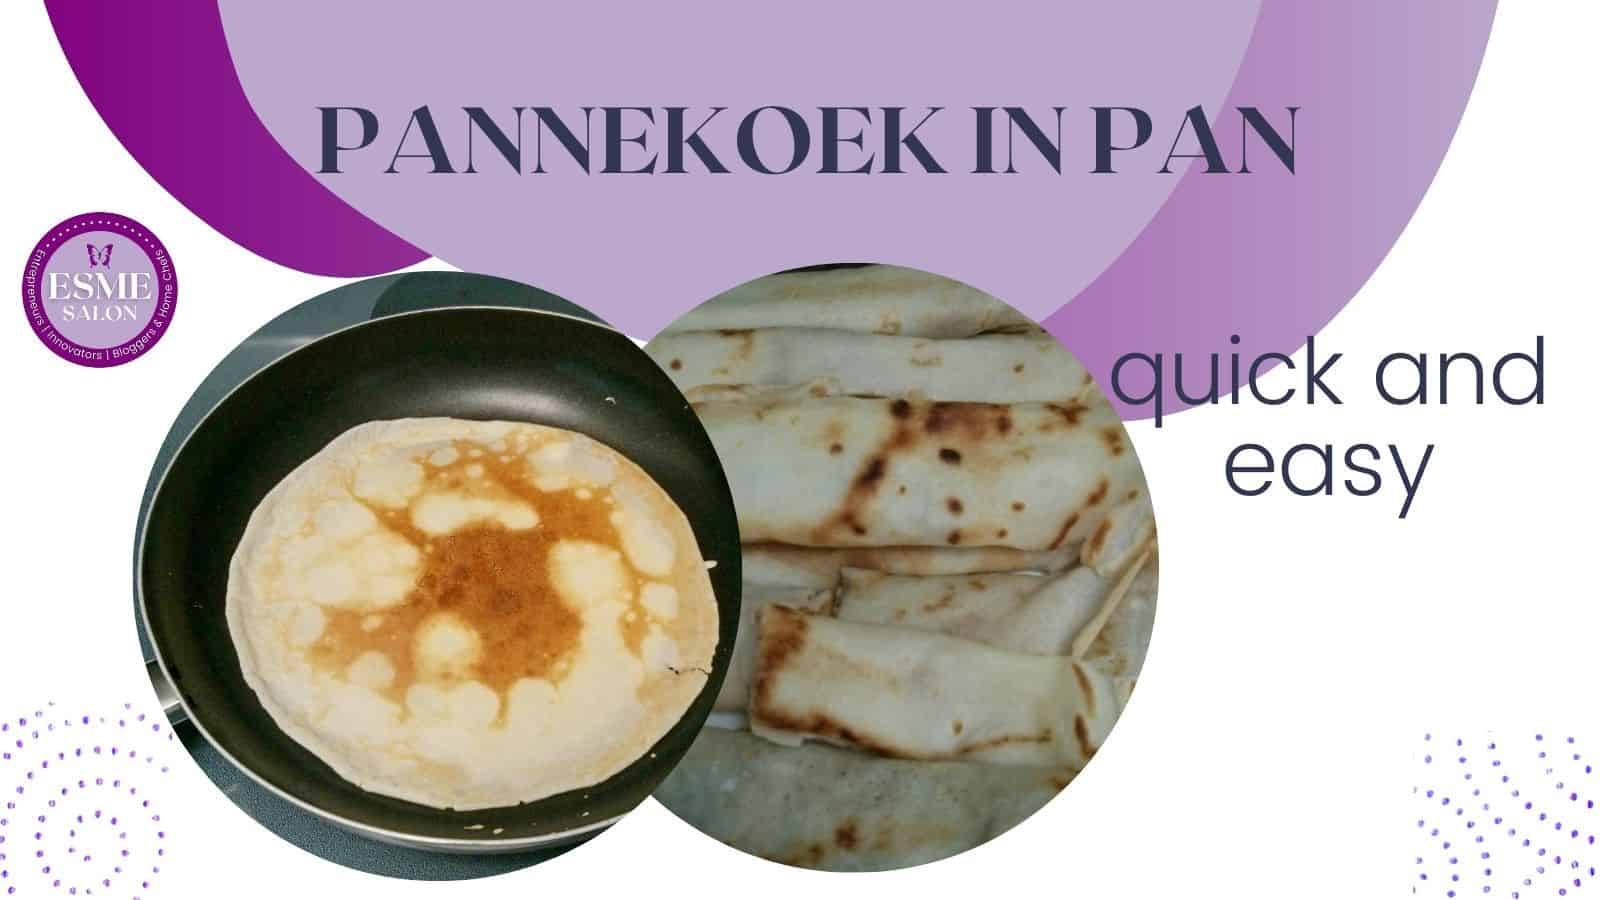 Pannekoek in the pan and rolled up for serving on the side